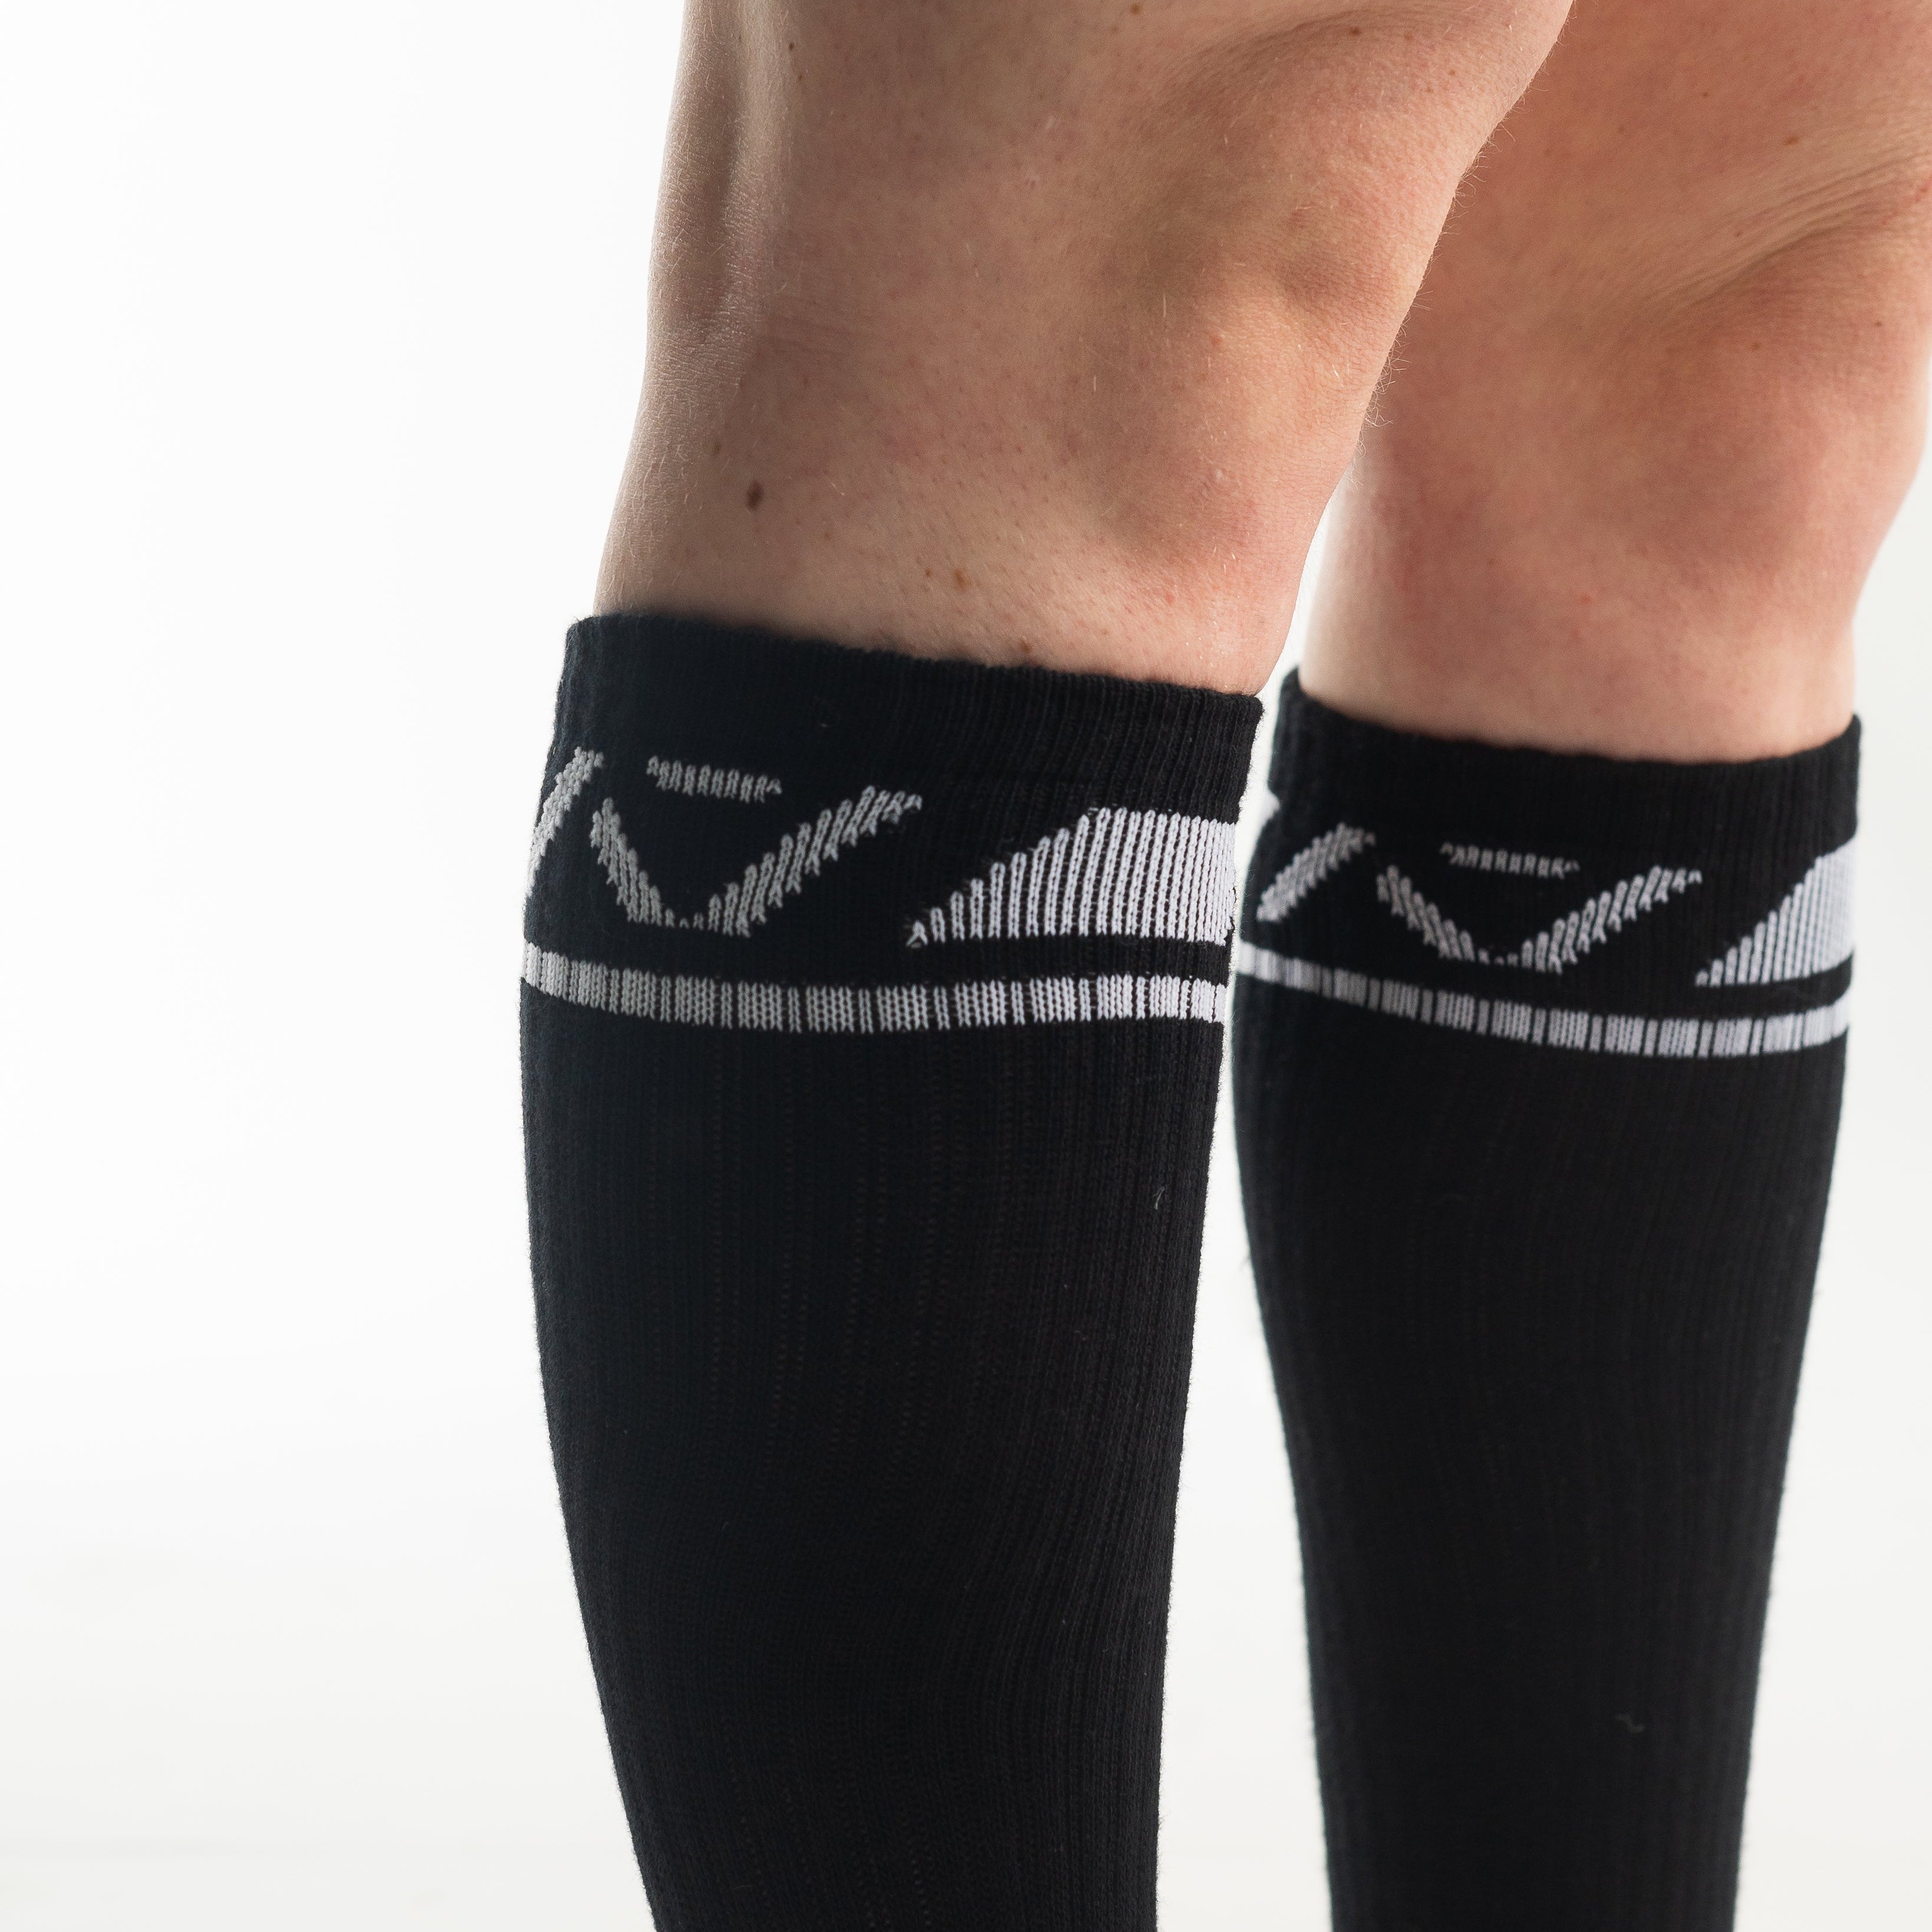 A7 Domino Deadlift socks are designed specifically for pulls and keep your shins protected from scrapes. A7 deadlift socks are a perfect pair to wear in training or powerlifting competition. The IPF Approved Kit includes Powerlifting Singlet, A7 Meet Shirt, A7 Zebra Wrist Wraps, A7 Deadlift Socks, Hourglass Knee Sleeves (Stiff Knee Sleeves and Rigor Mortis Knee Sleeves). All A7 Powerlifting Equipment shipping to UK, Norway, Switzerland and Iceland.